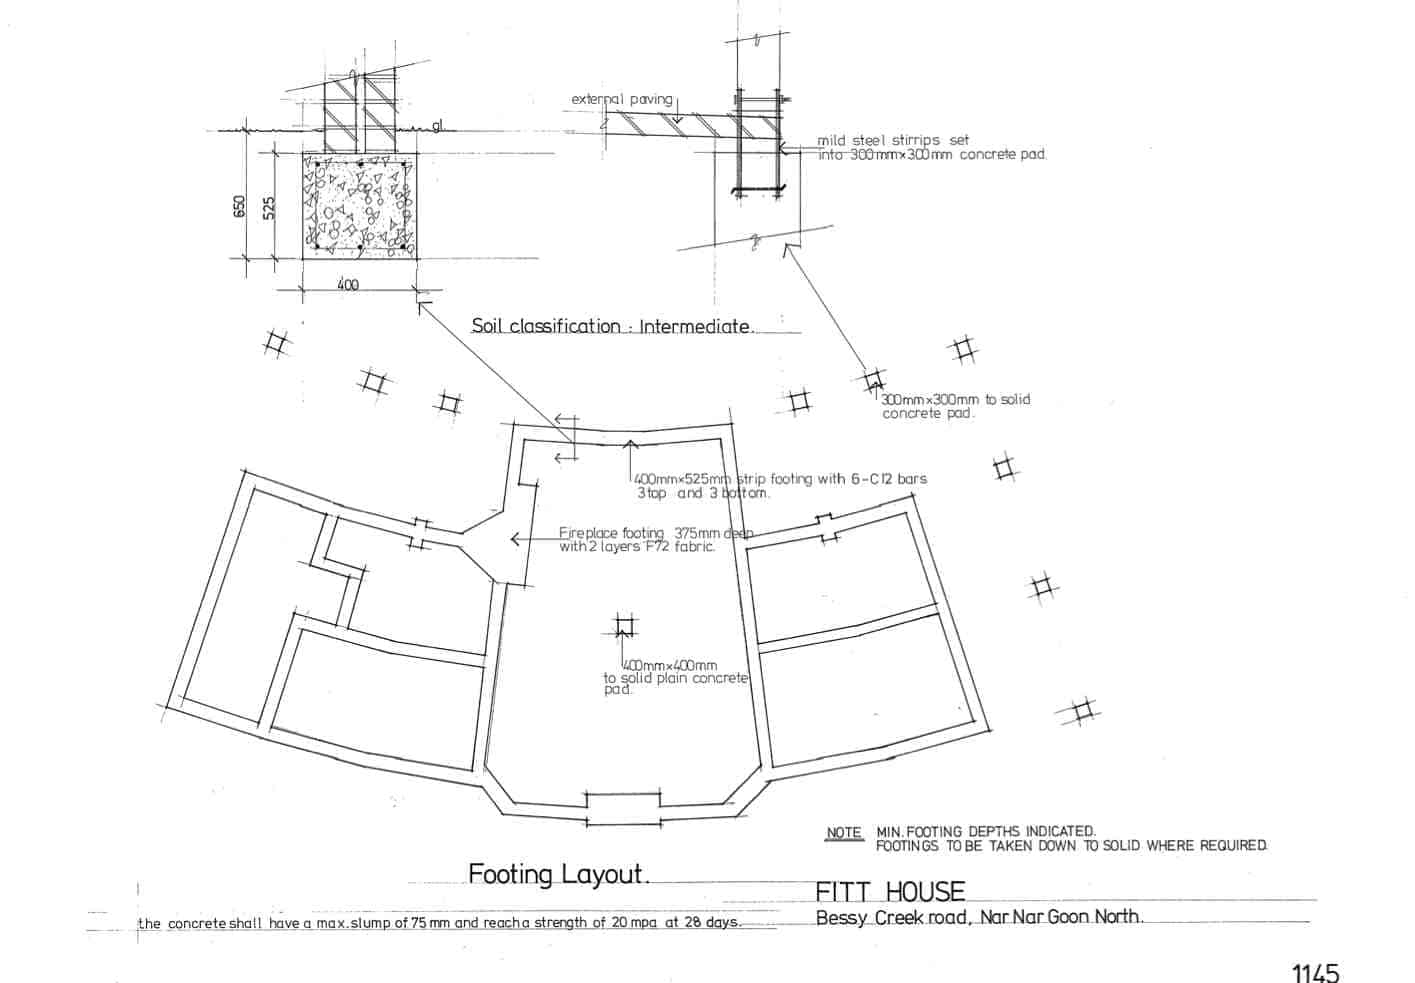 Fitt, 2: footing layout